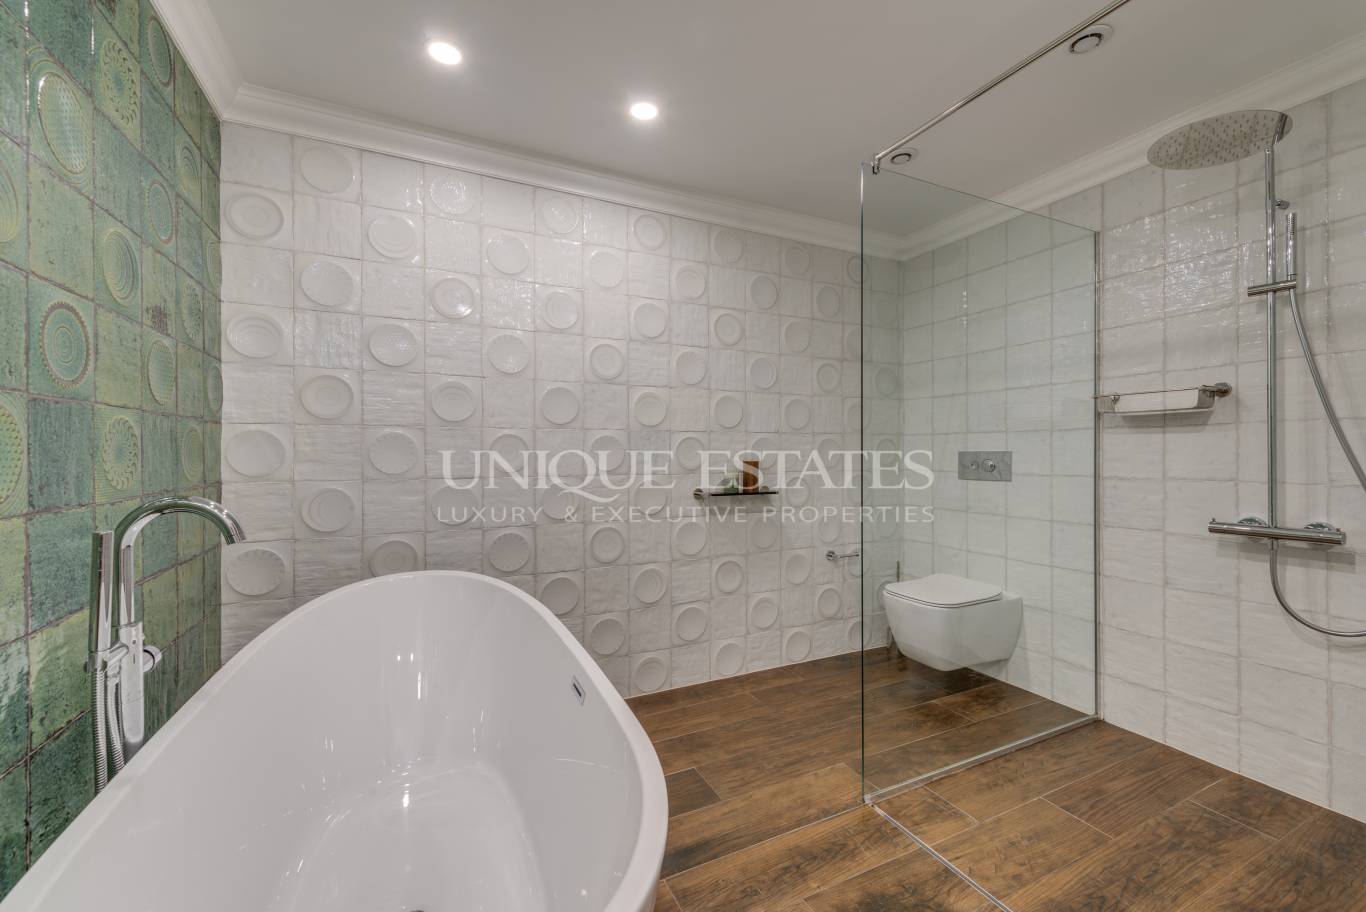 House for sale in Sofia, Downtown with listing ID: K13548 - image 13